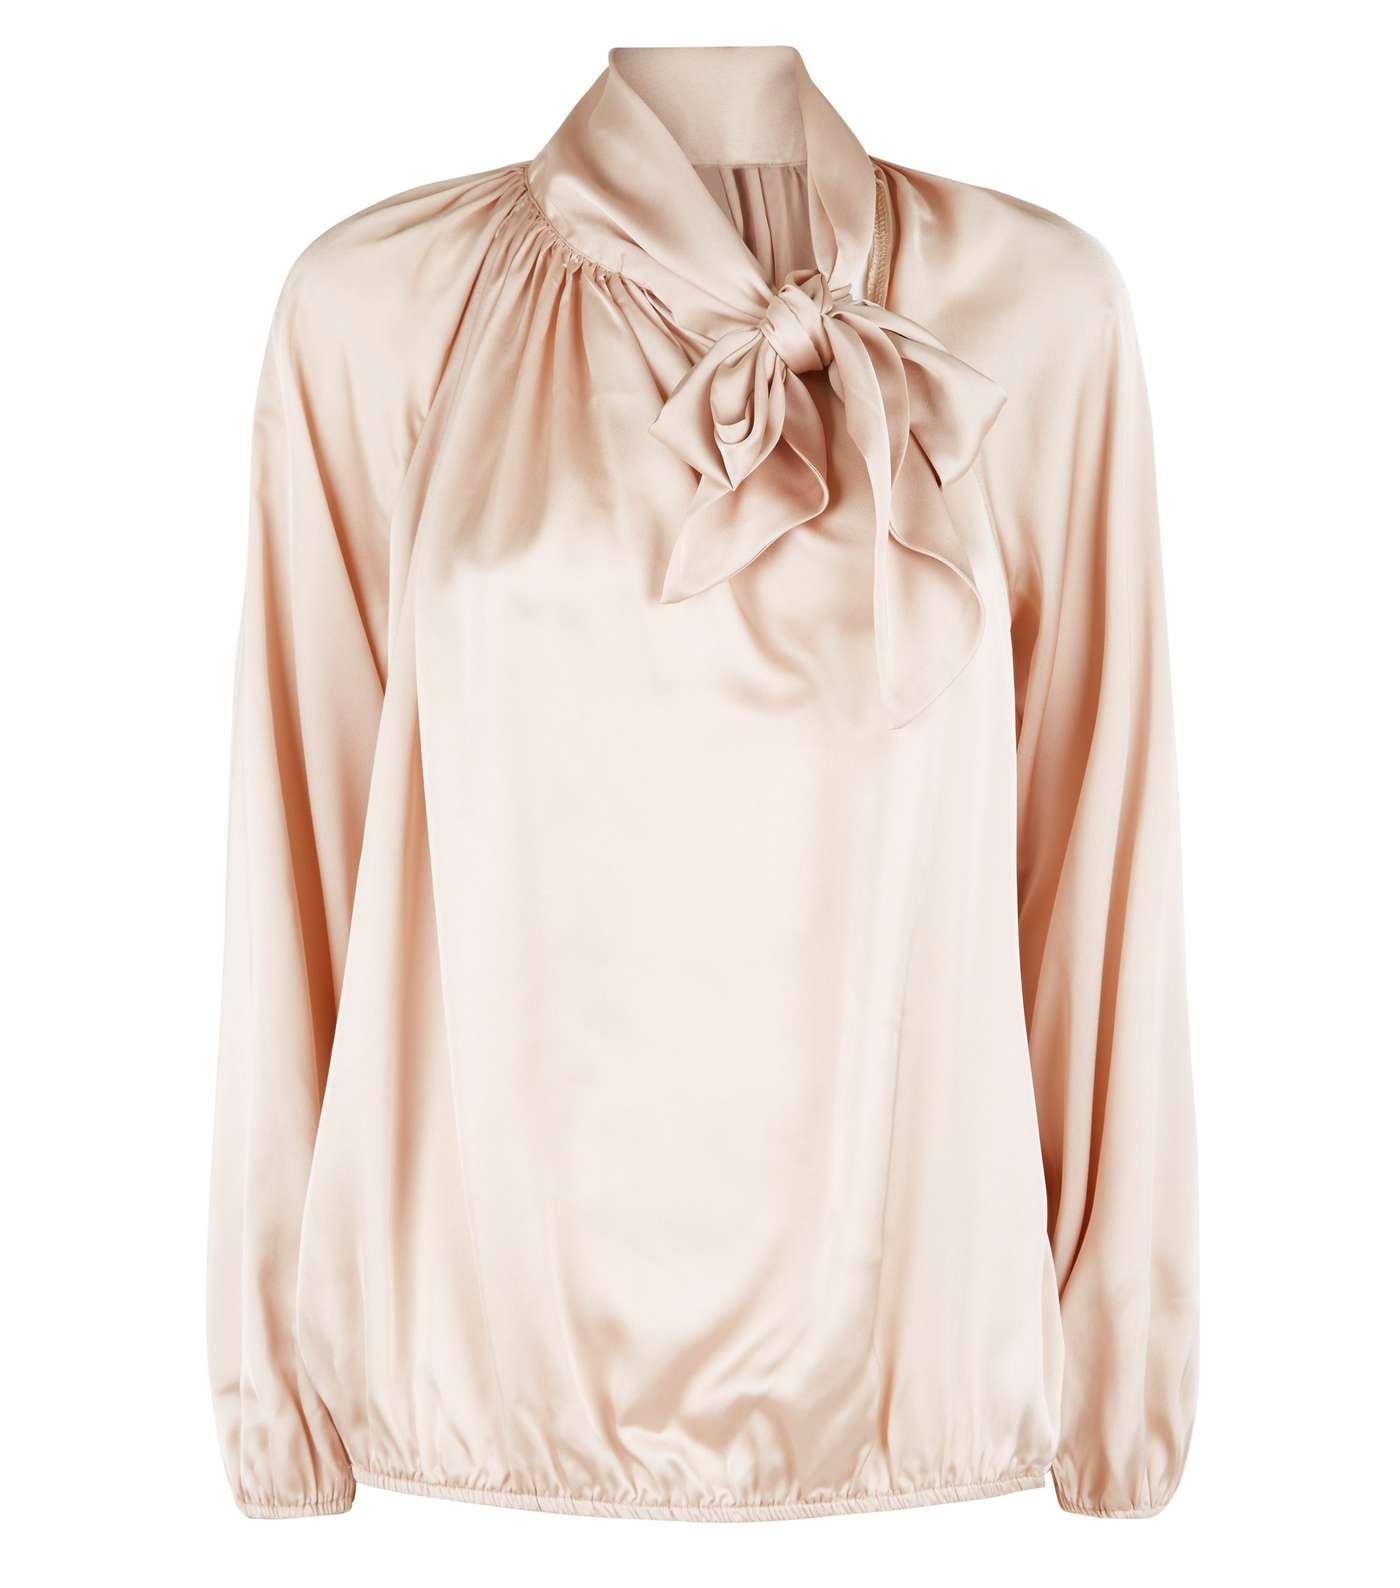 Cameo Rose Pale Pink Satin Tie Neck Blouse Image 4